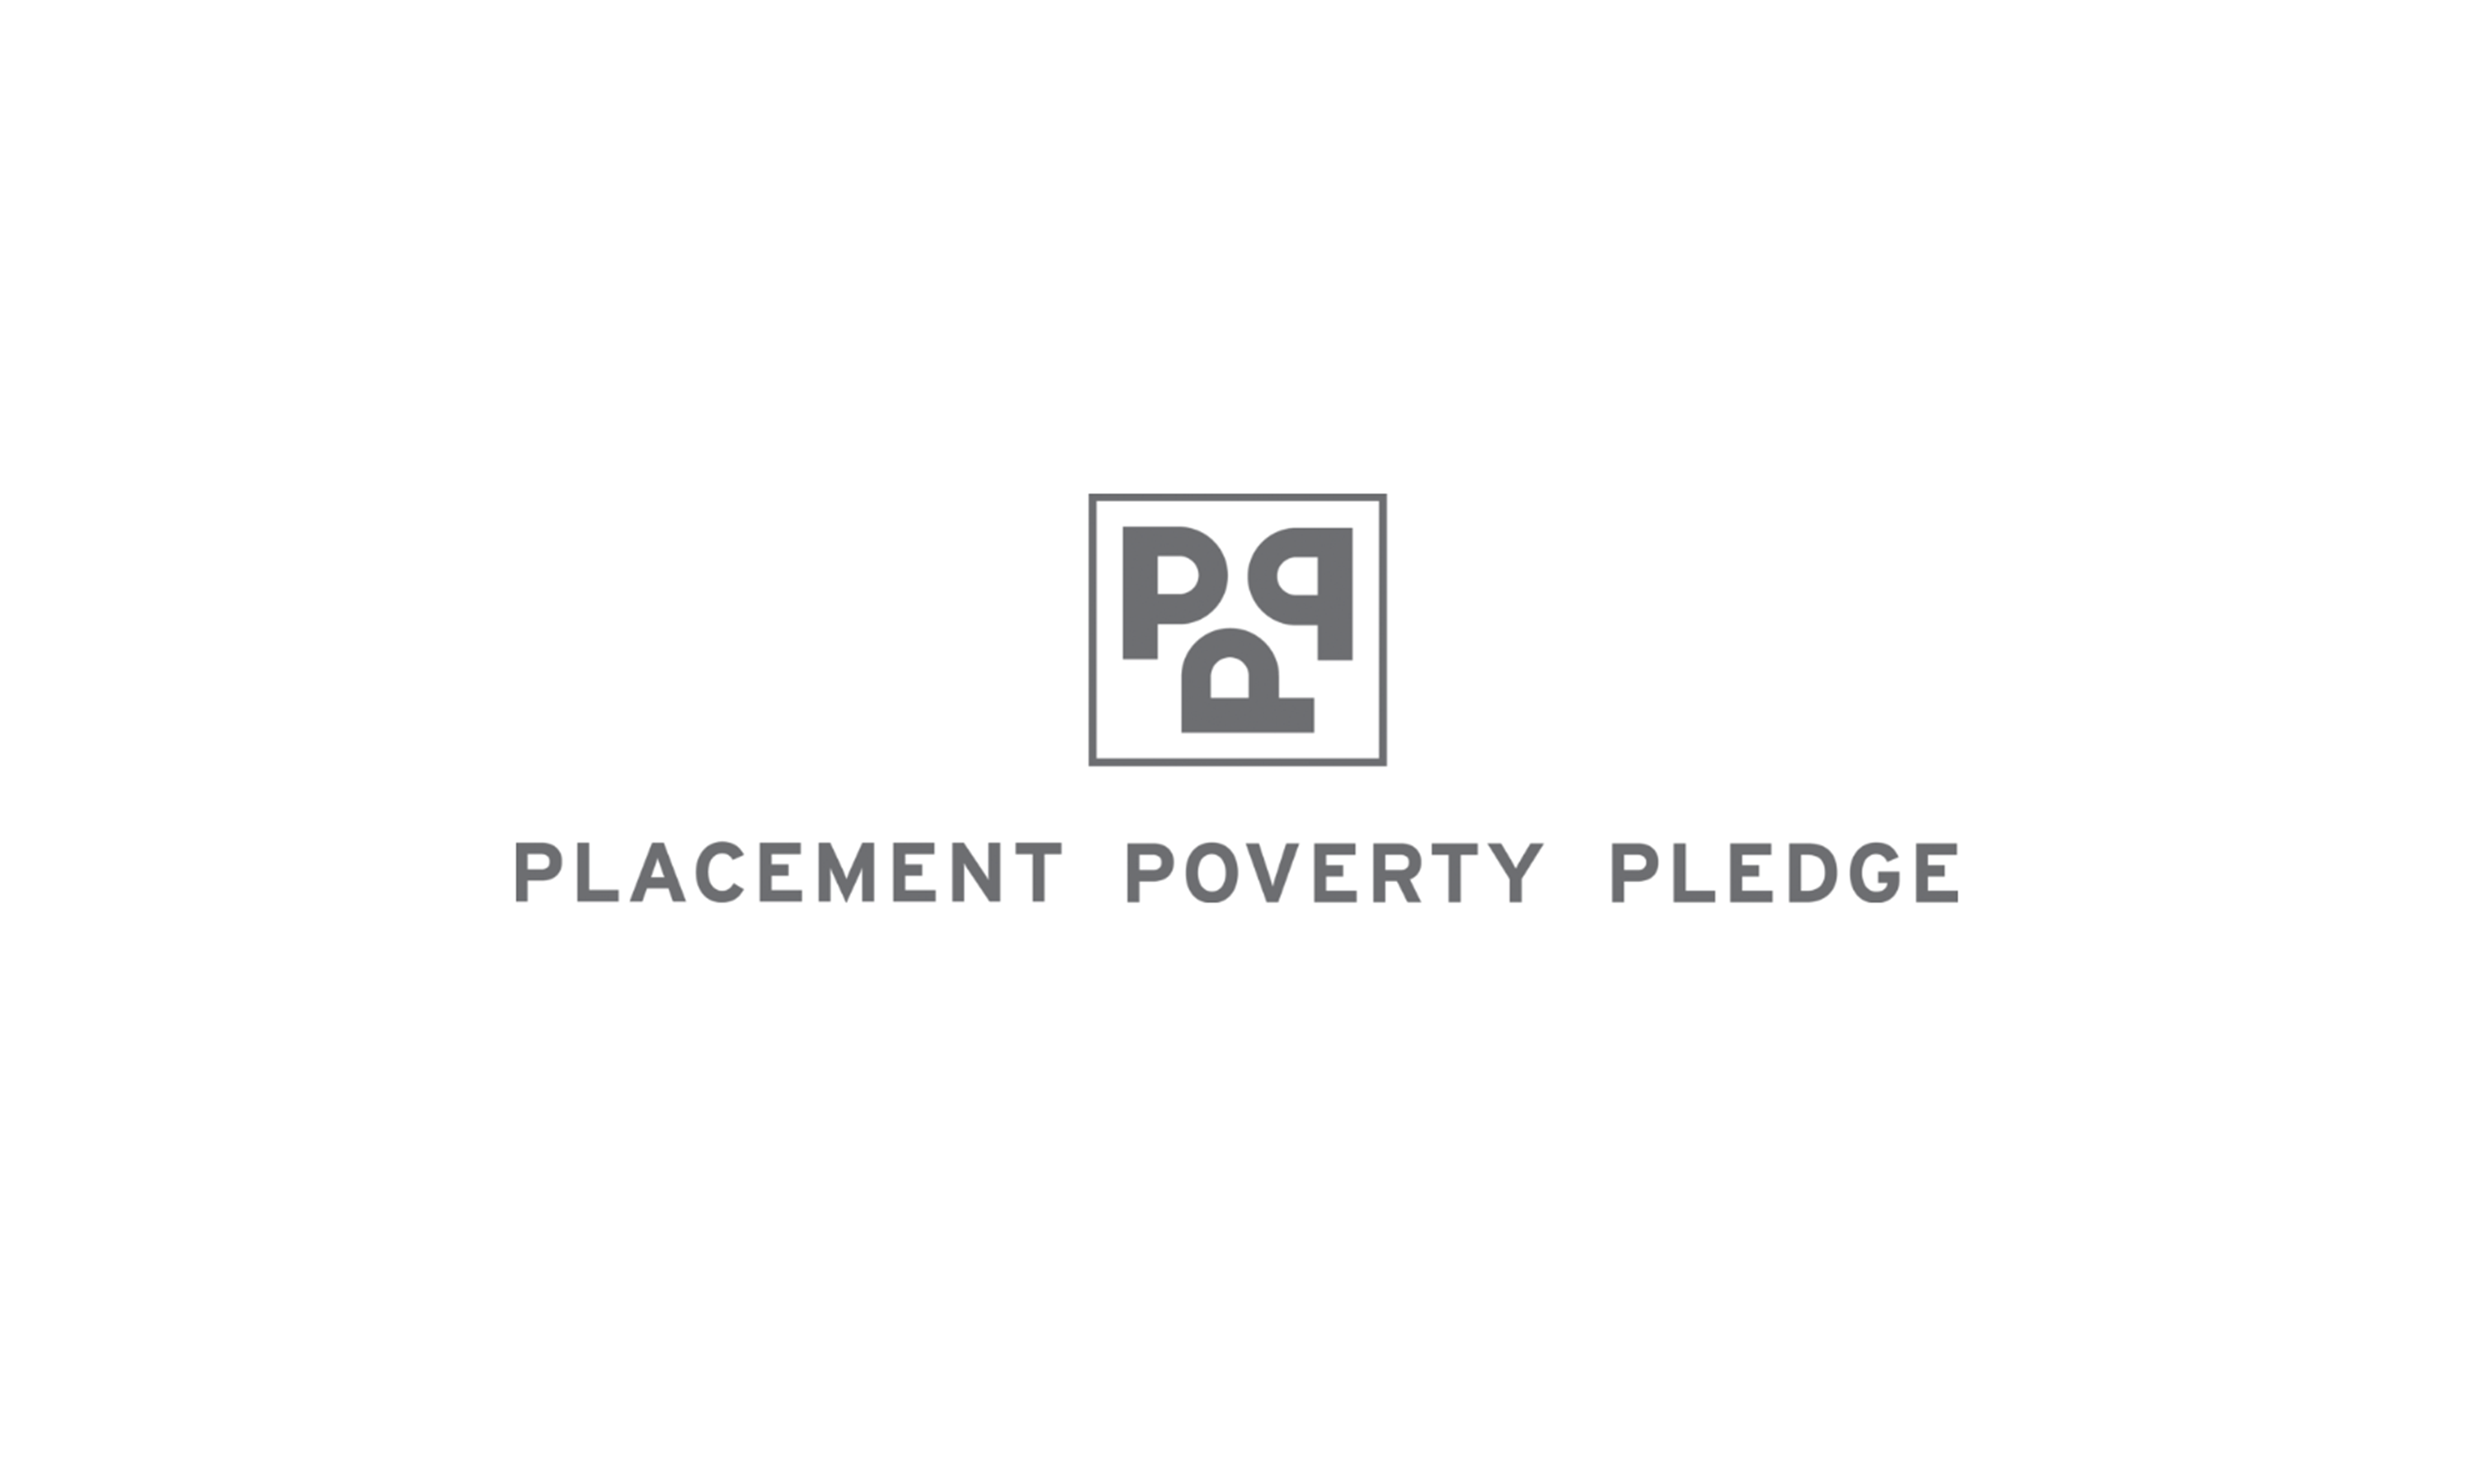 Neon sign-up to placement poverty pledge